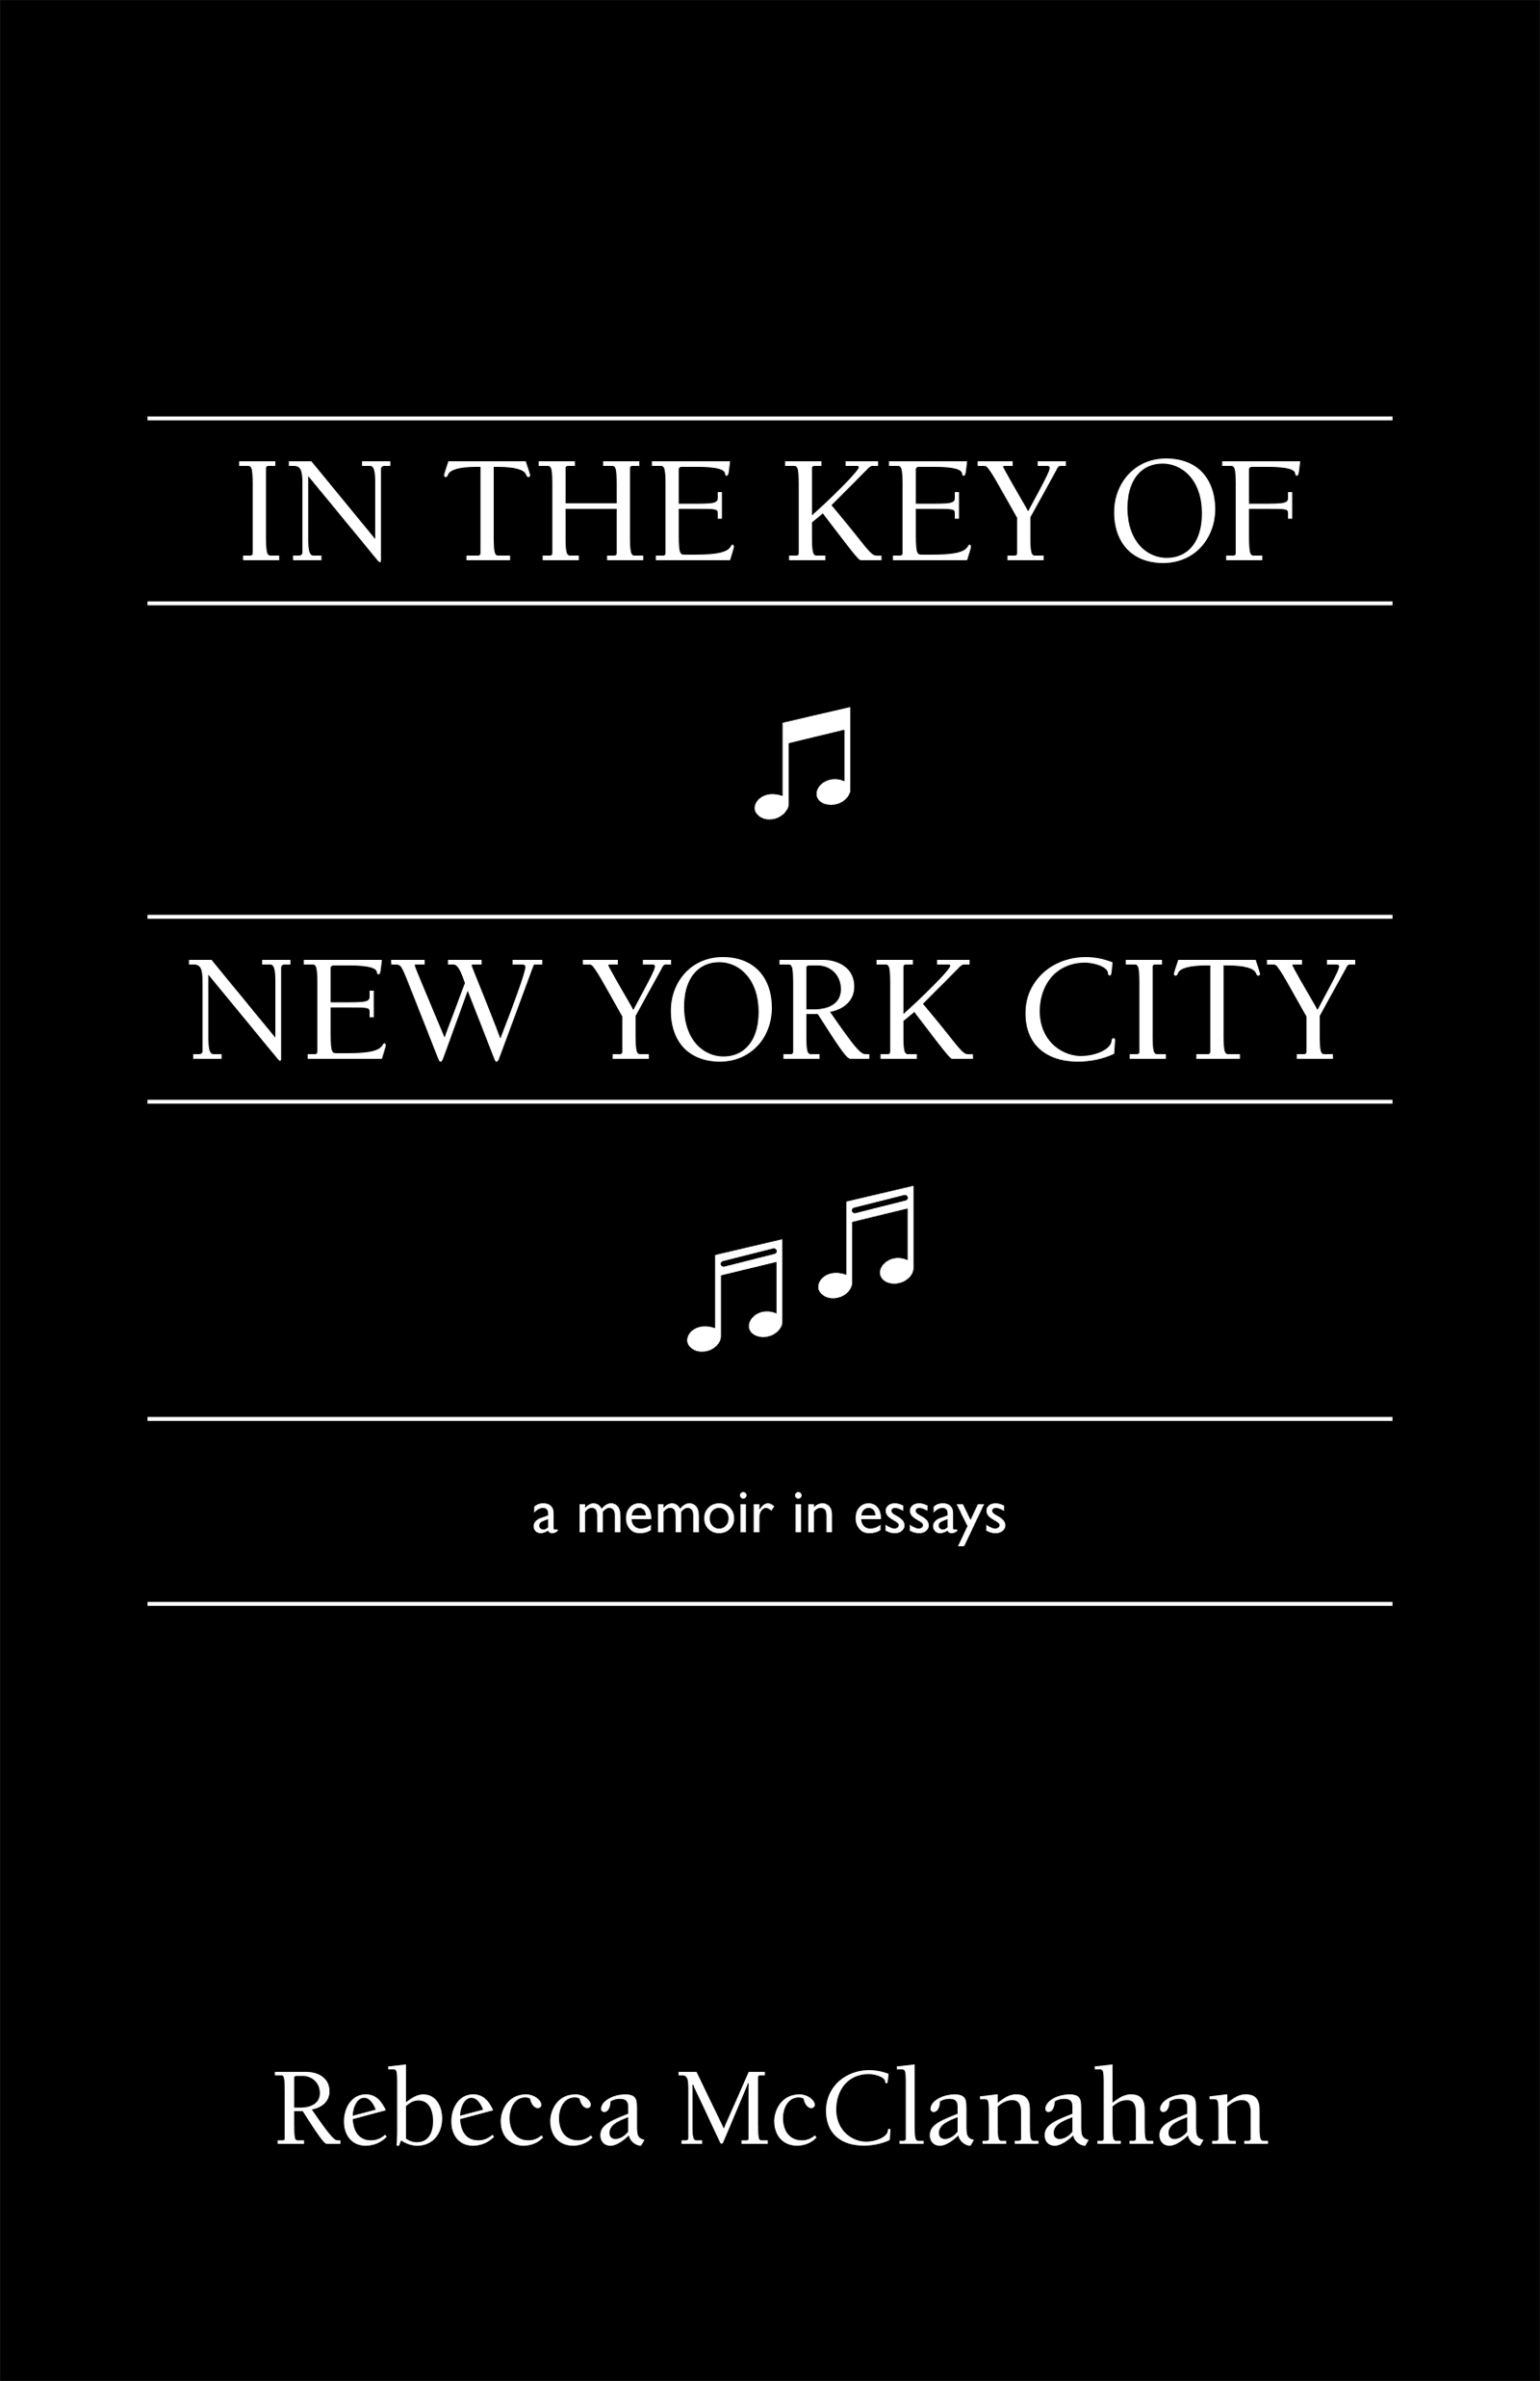 A black background with white script that reads In the Key of New York City a memoir in essays by Rebecca McClanahan.